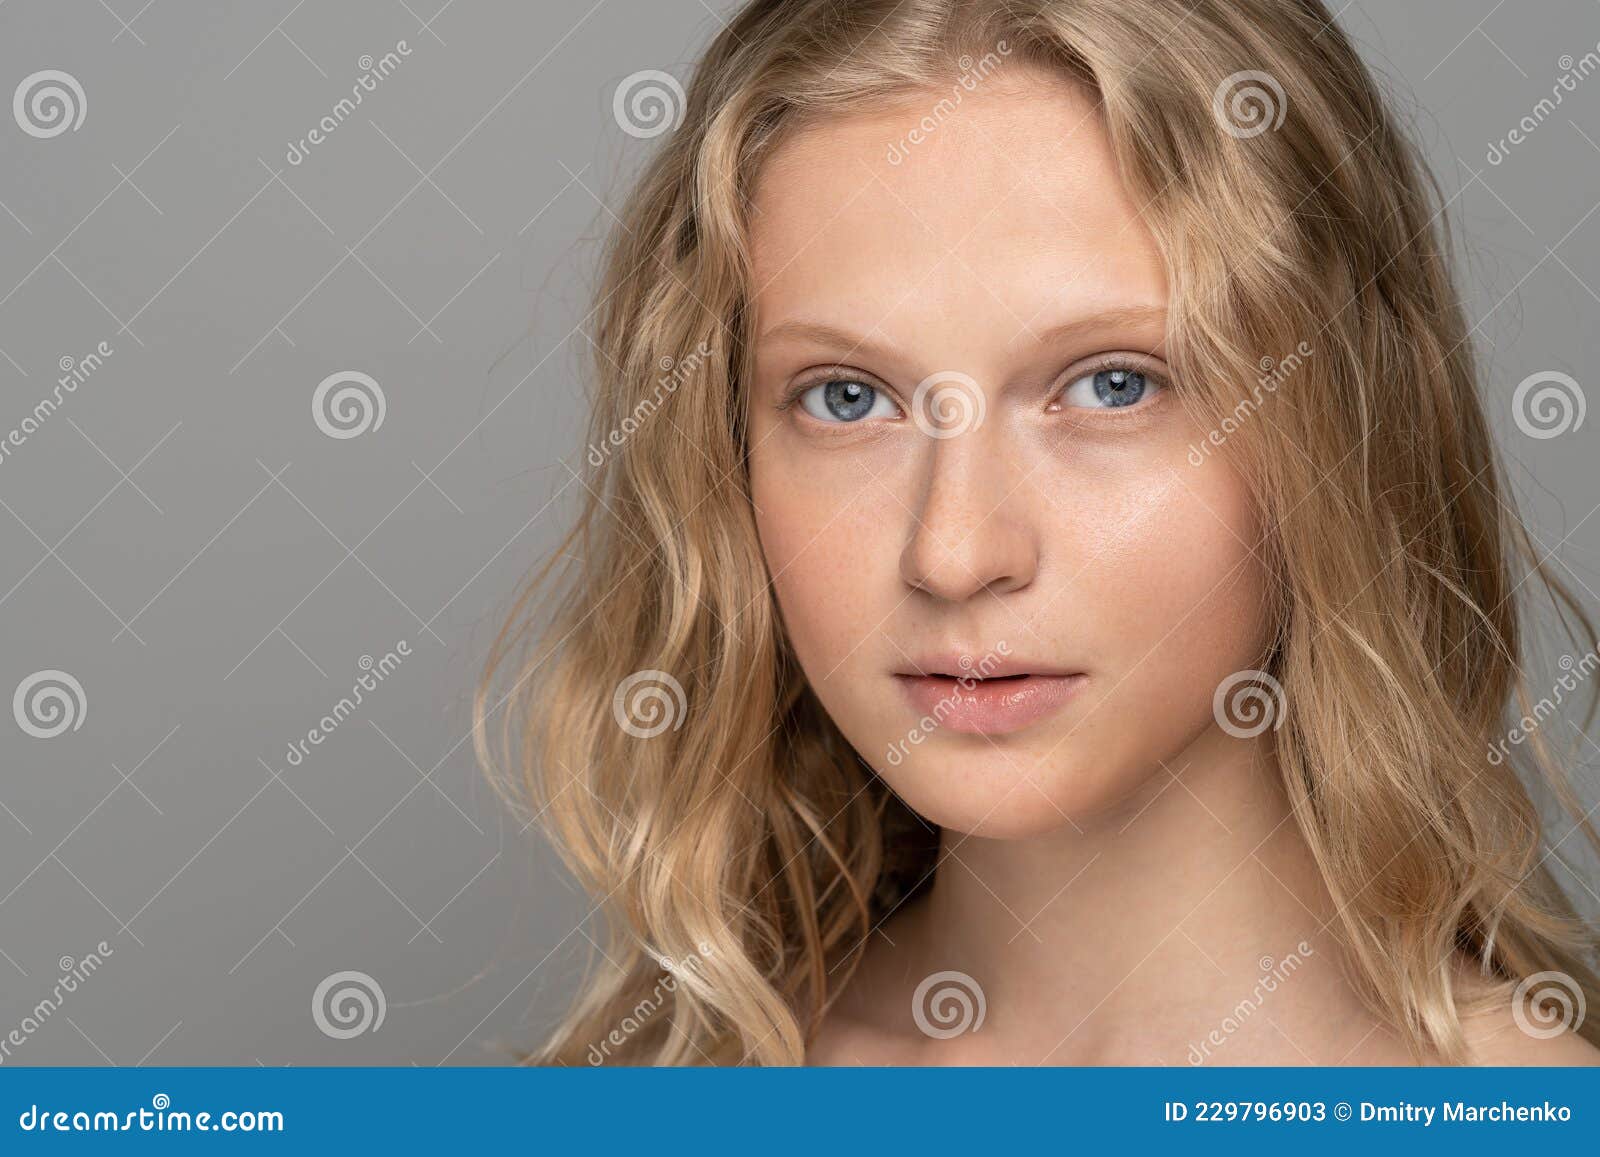 Beauty Portrait with Blue Eyes and Curly Hair - wide 1